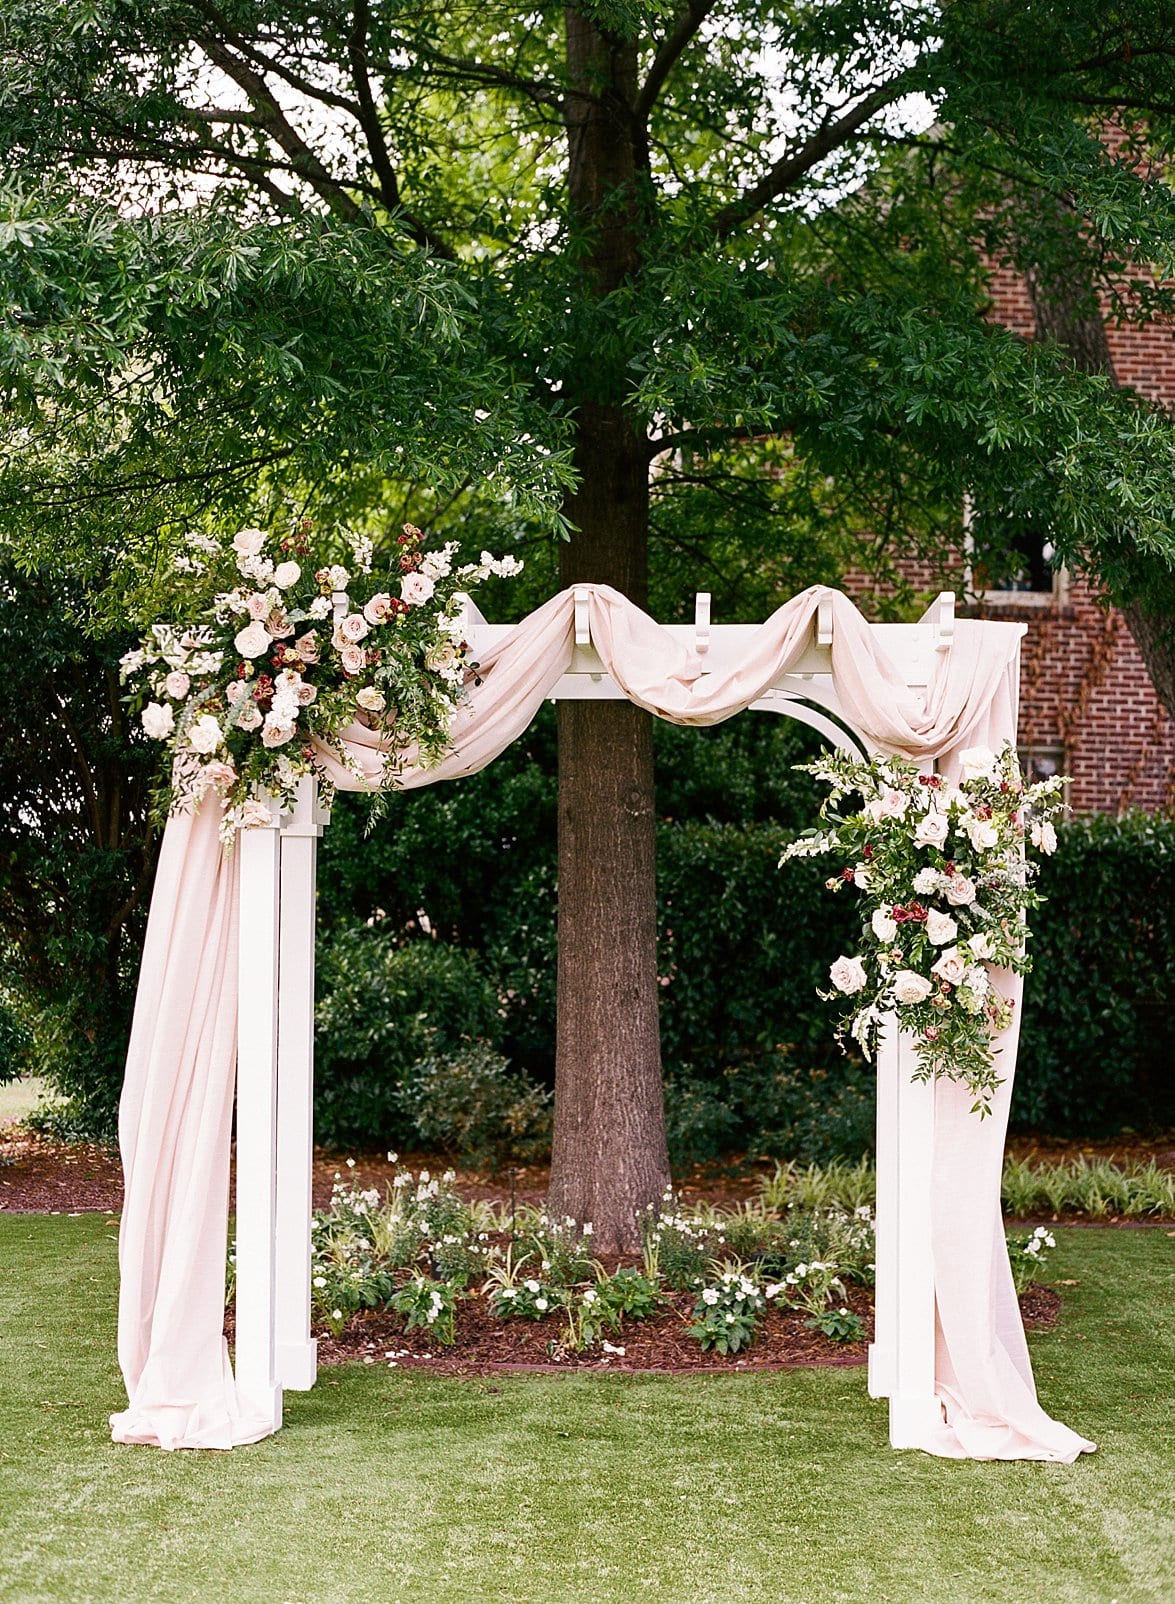 Merrimon Wynne white arbor with fabric draped across it behind the flower installations at the ceremony site photo